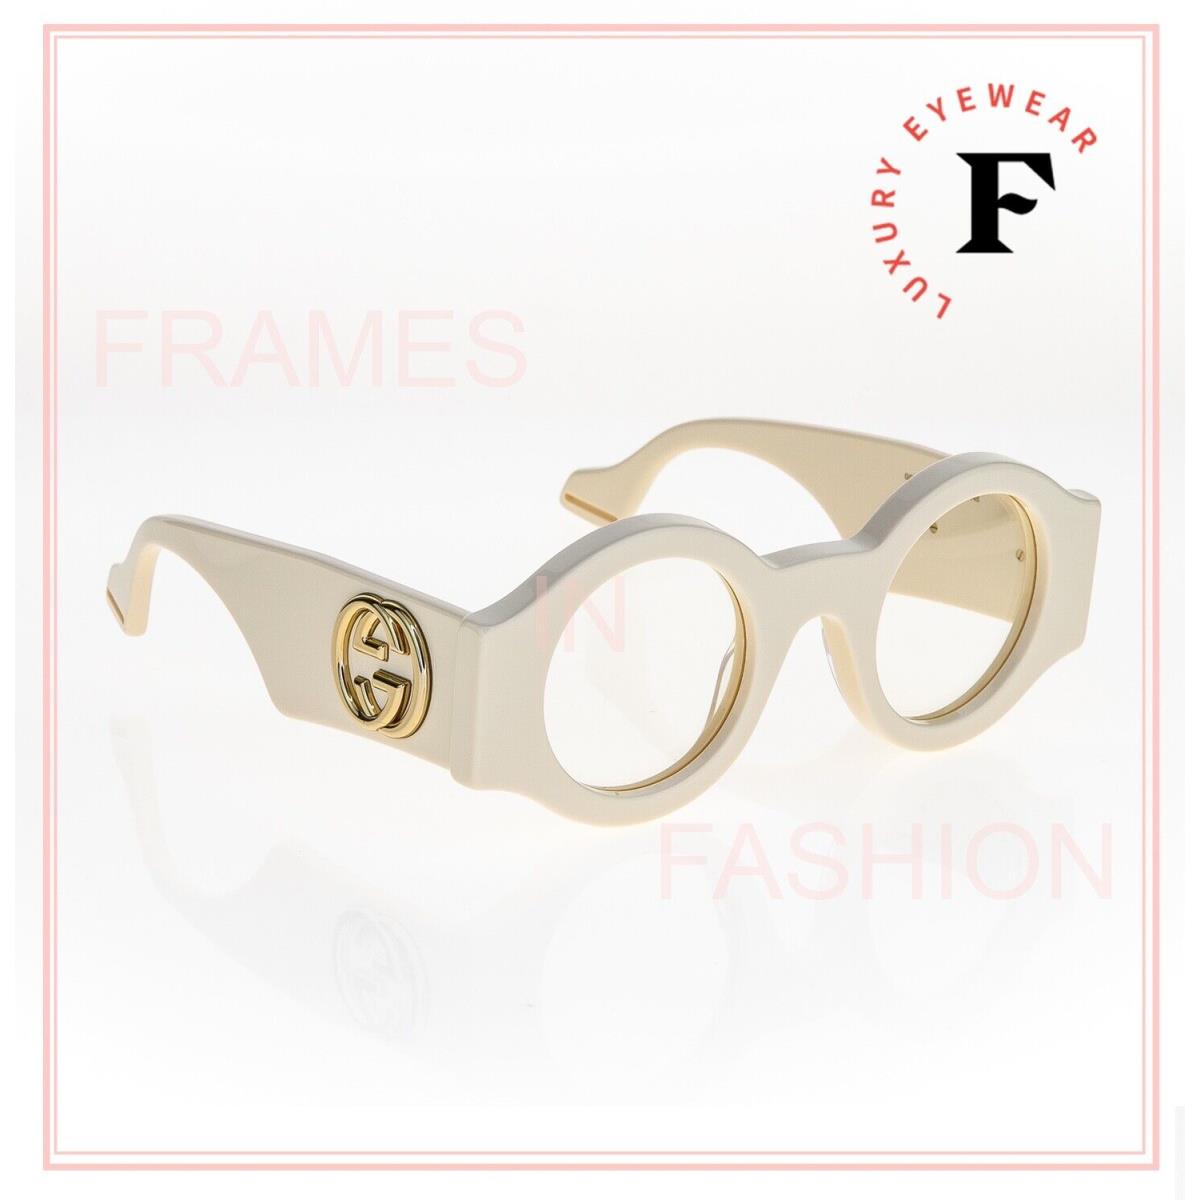 Gucci sunglasses  - 002 , Ivory Frame, Clear Lens